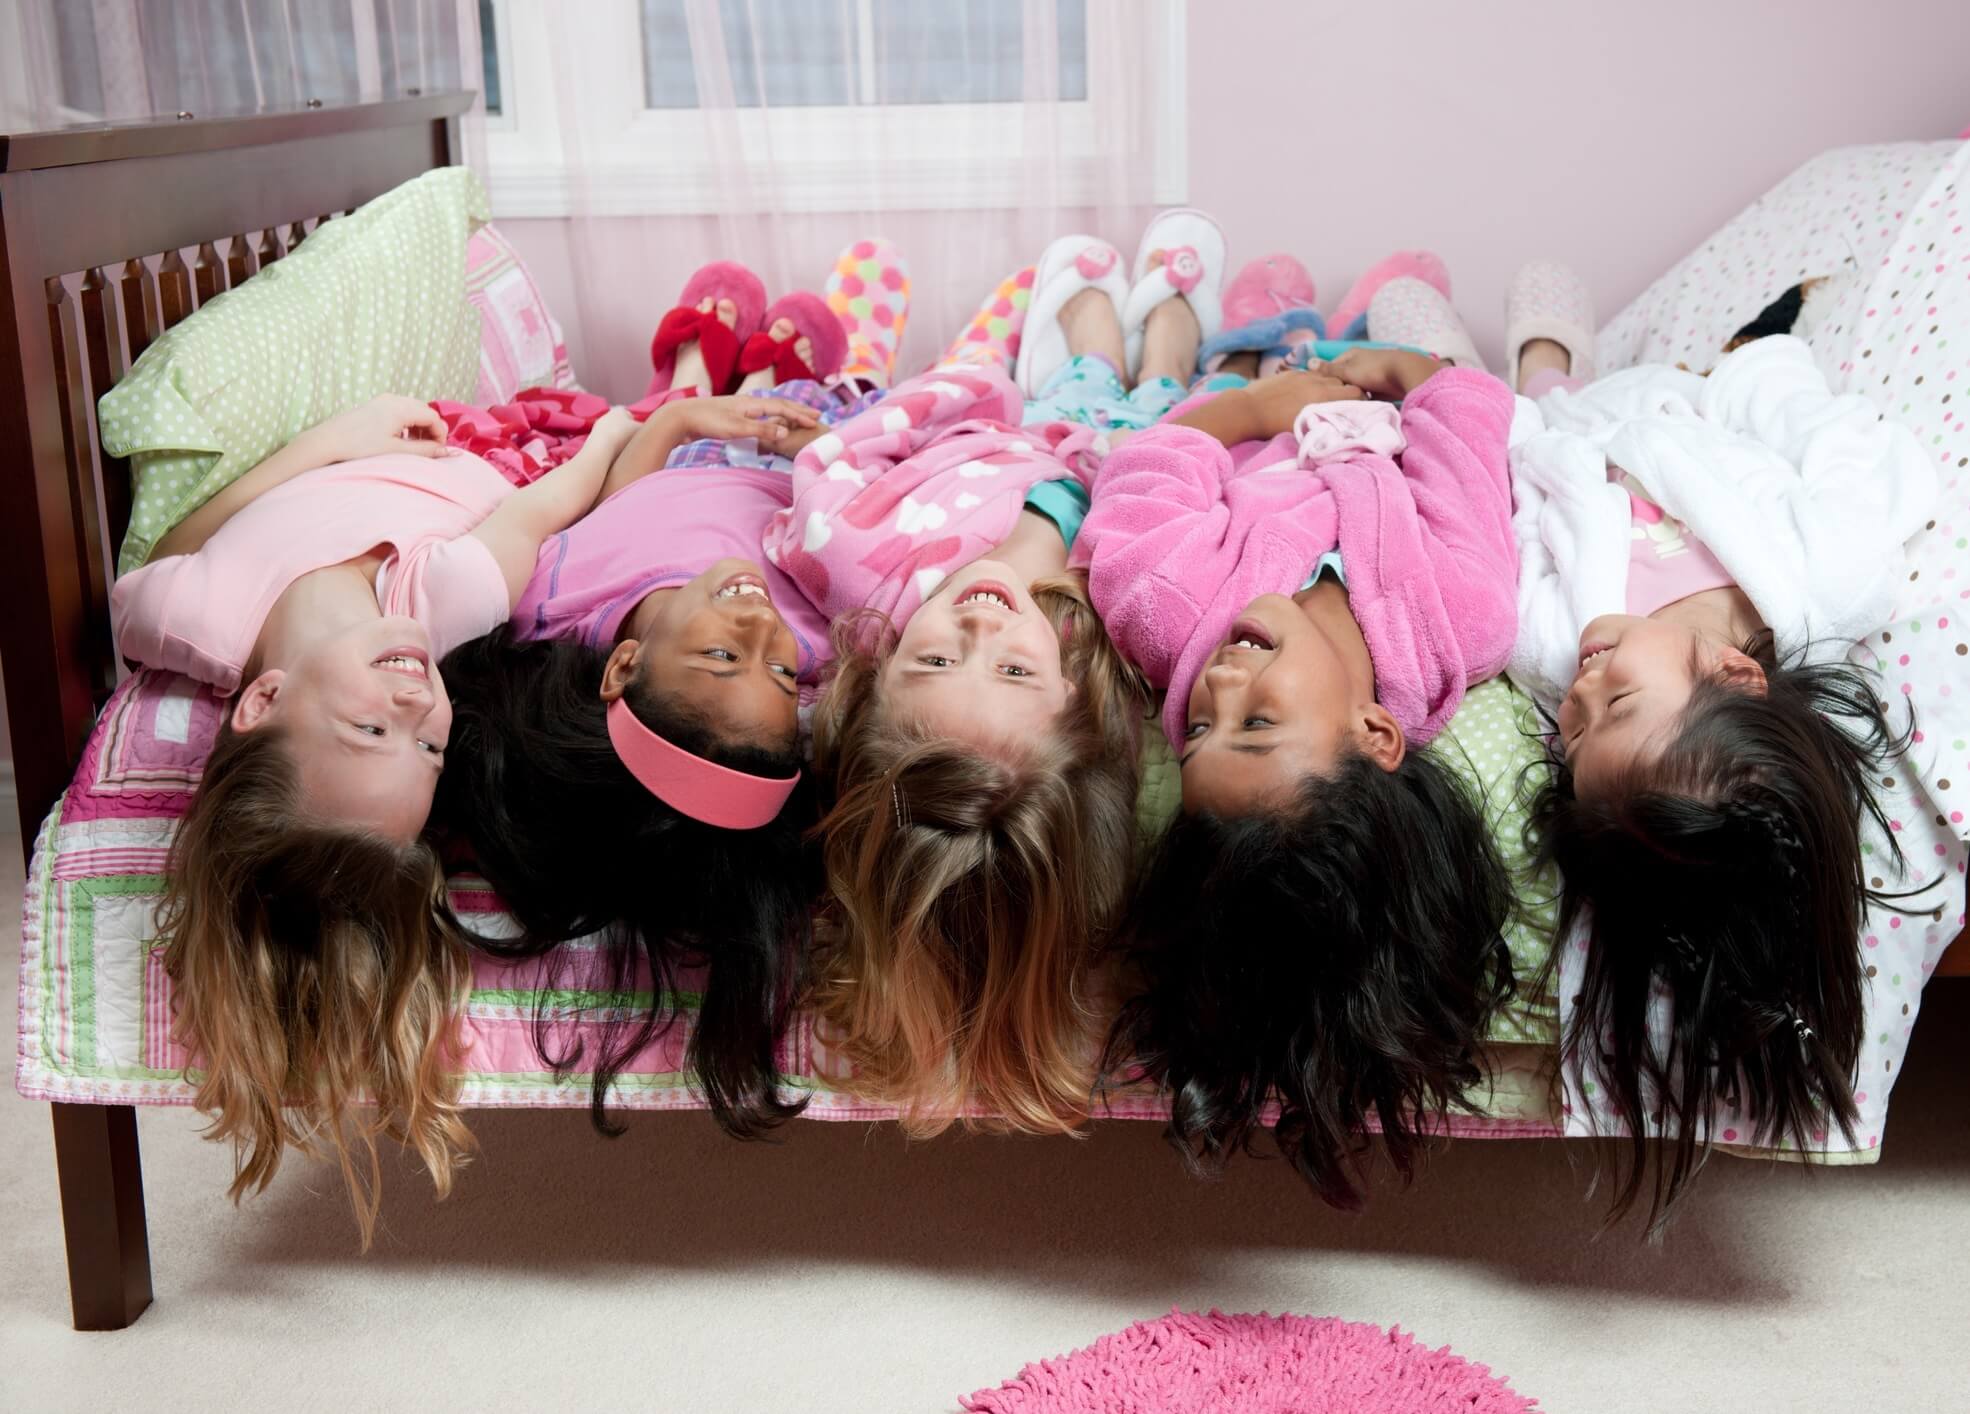 Today’s quirky question is about SLEEPOVER PRANKS! 